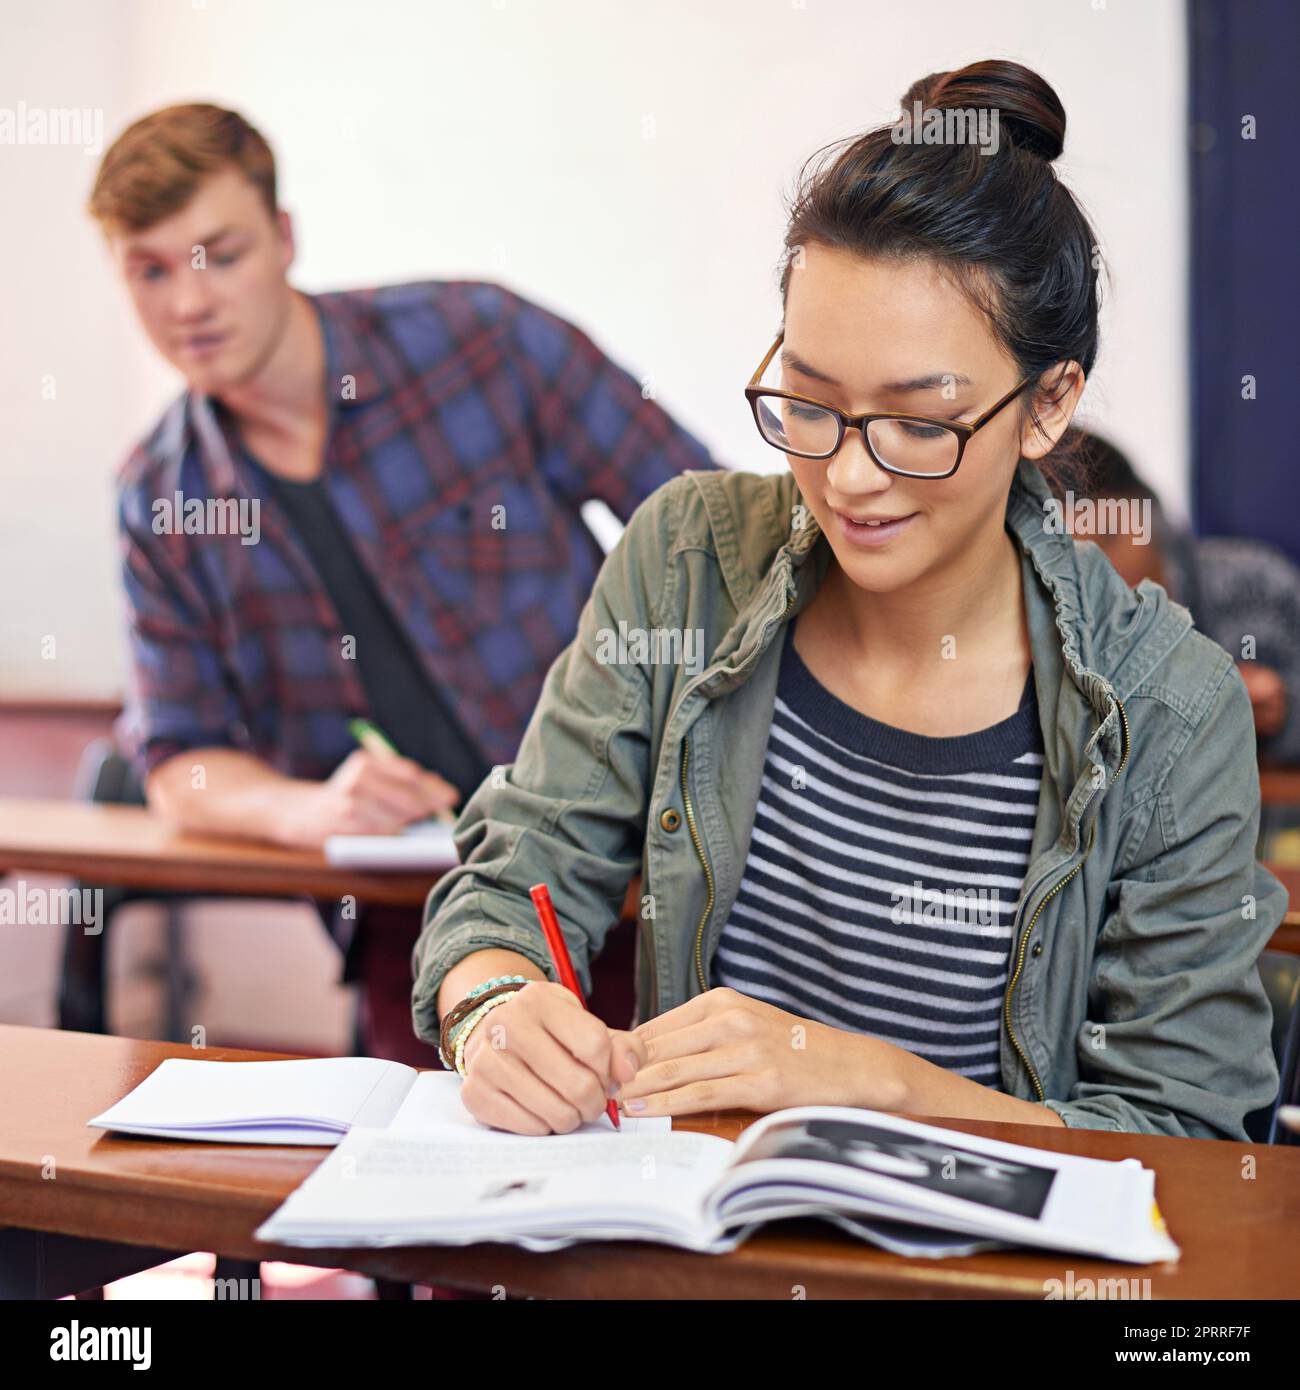 Cheating wont pay off in the end. a student trying to see another students work in class. Stock Photo